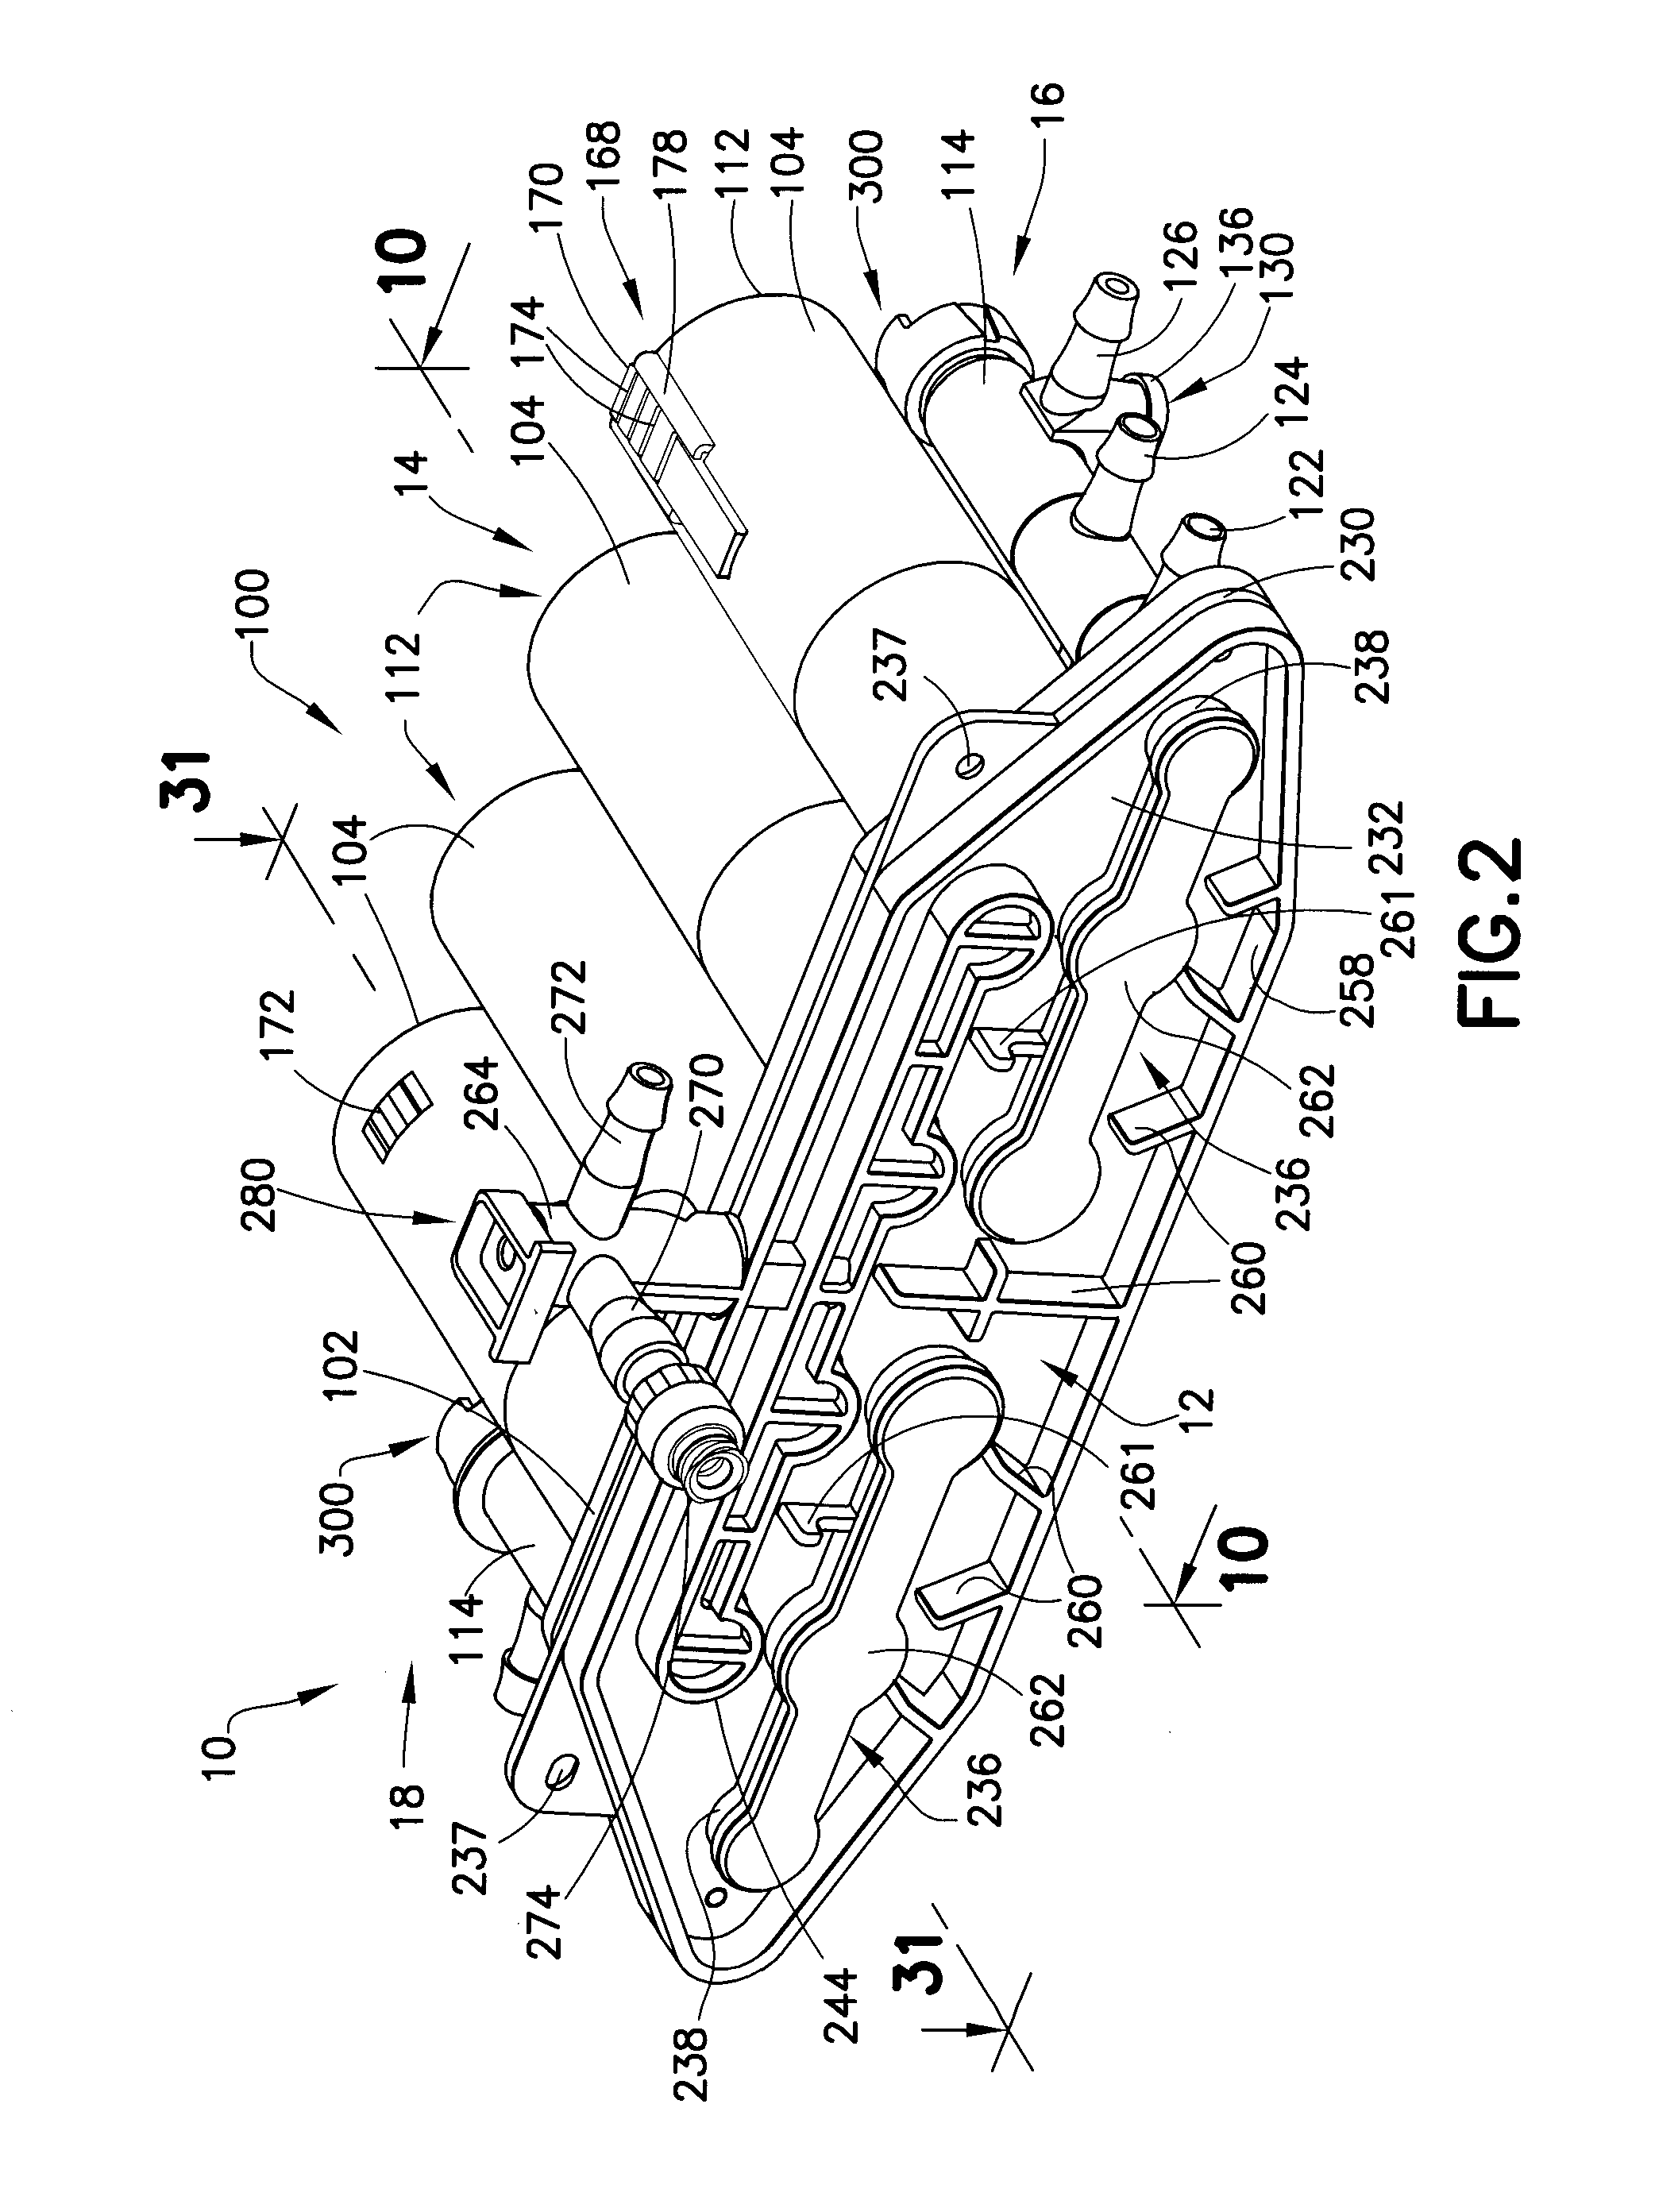 Continuous Multi-Fluid Delivery System and Method